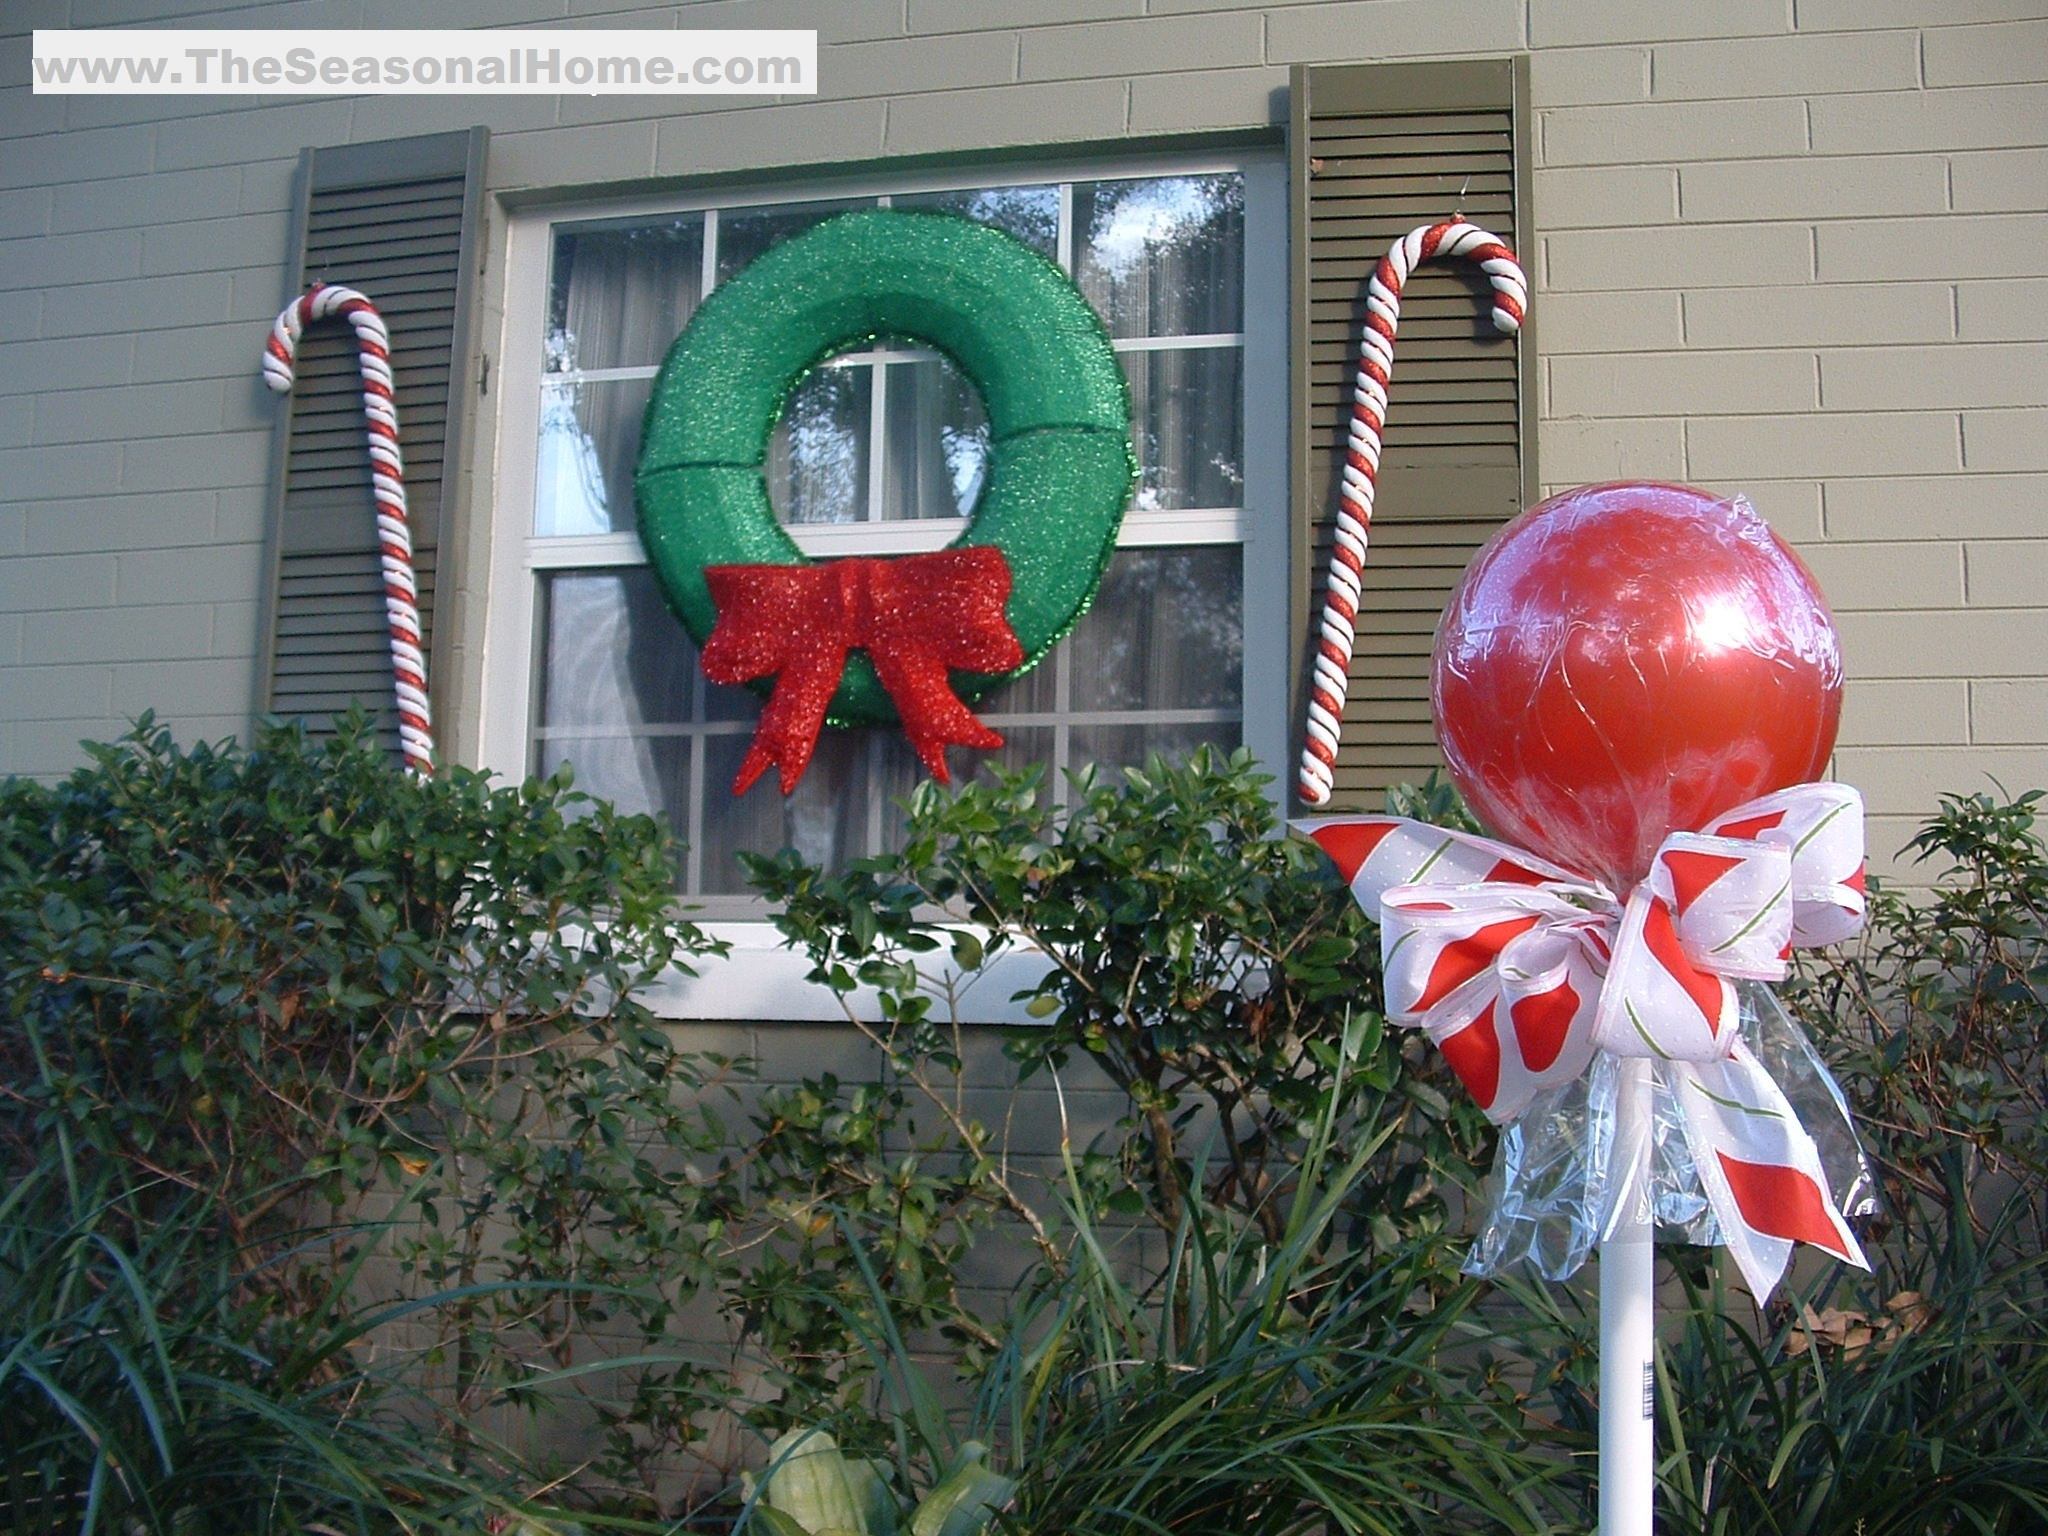 DIY Giant Outdoor Christmas Ornaments
 Outdoor “CANDY” A Christmas Decorating Idea The